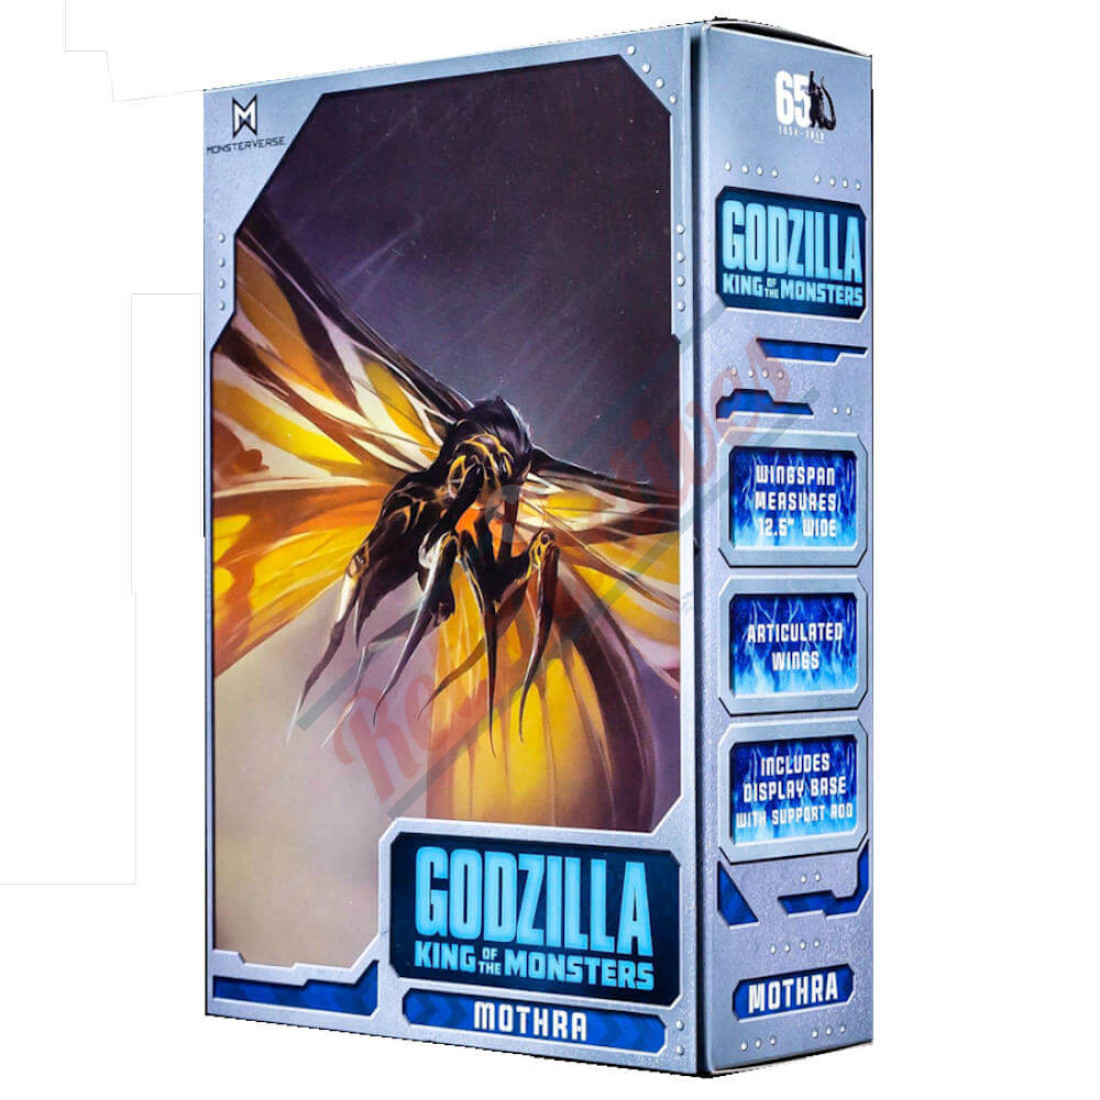 Neca Godzilla King Of Monsters 12 Inch Wing To Wing Action Figure Mothra 2019 3843